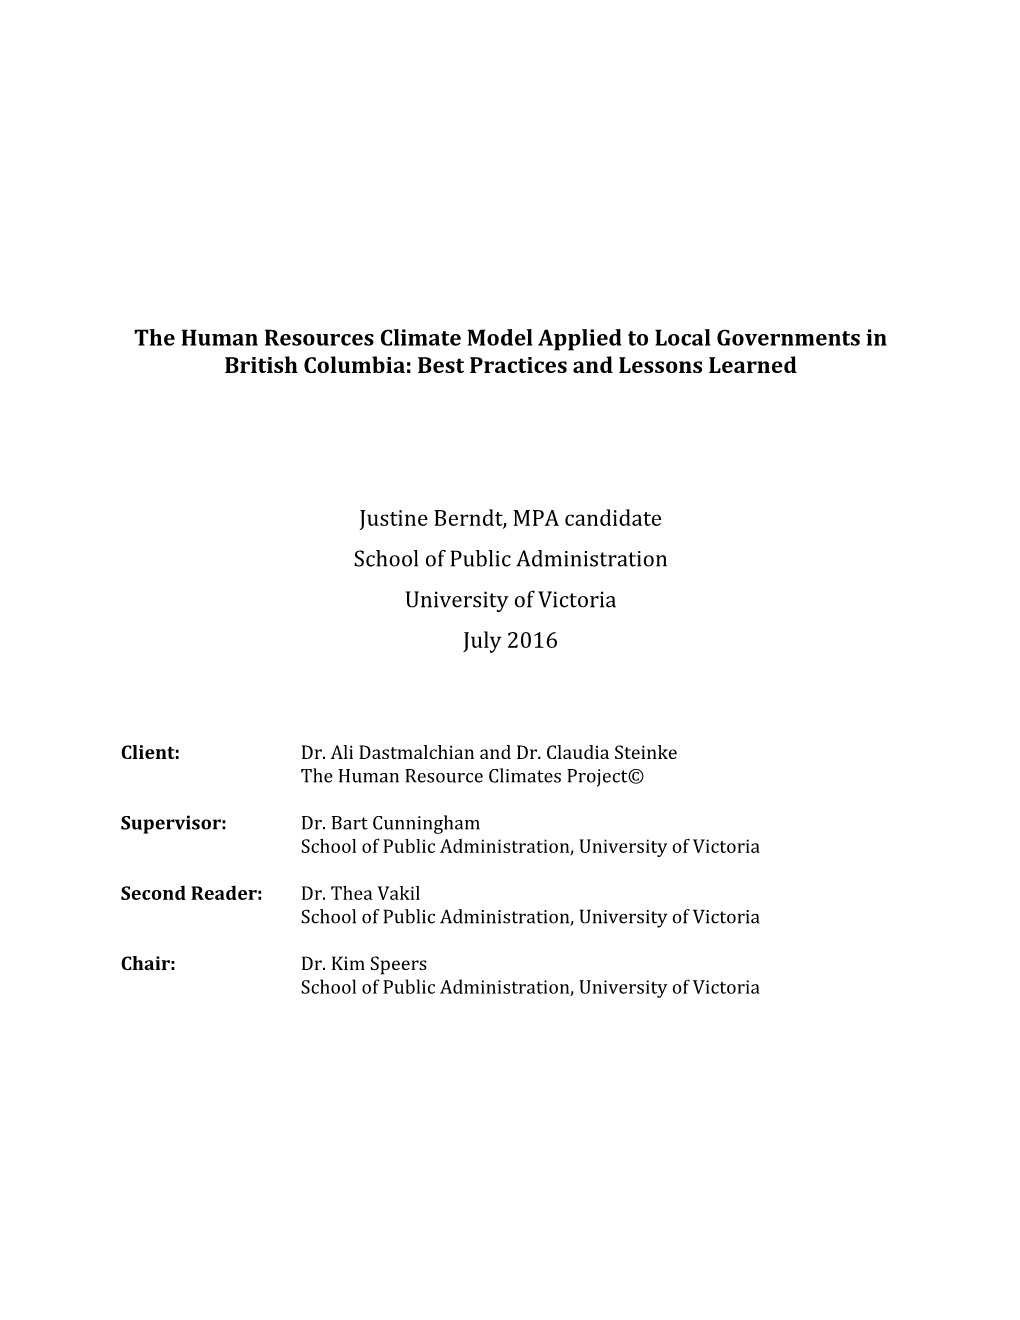 The Human Resources Climate Model Applied to Local Governments in British Columbia: Best Practices and Lessons Learned